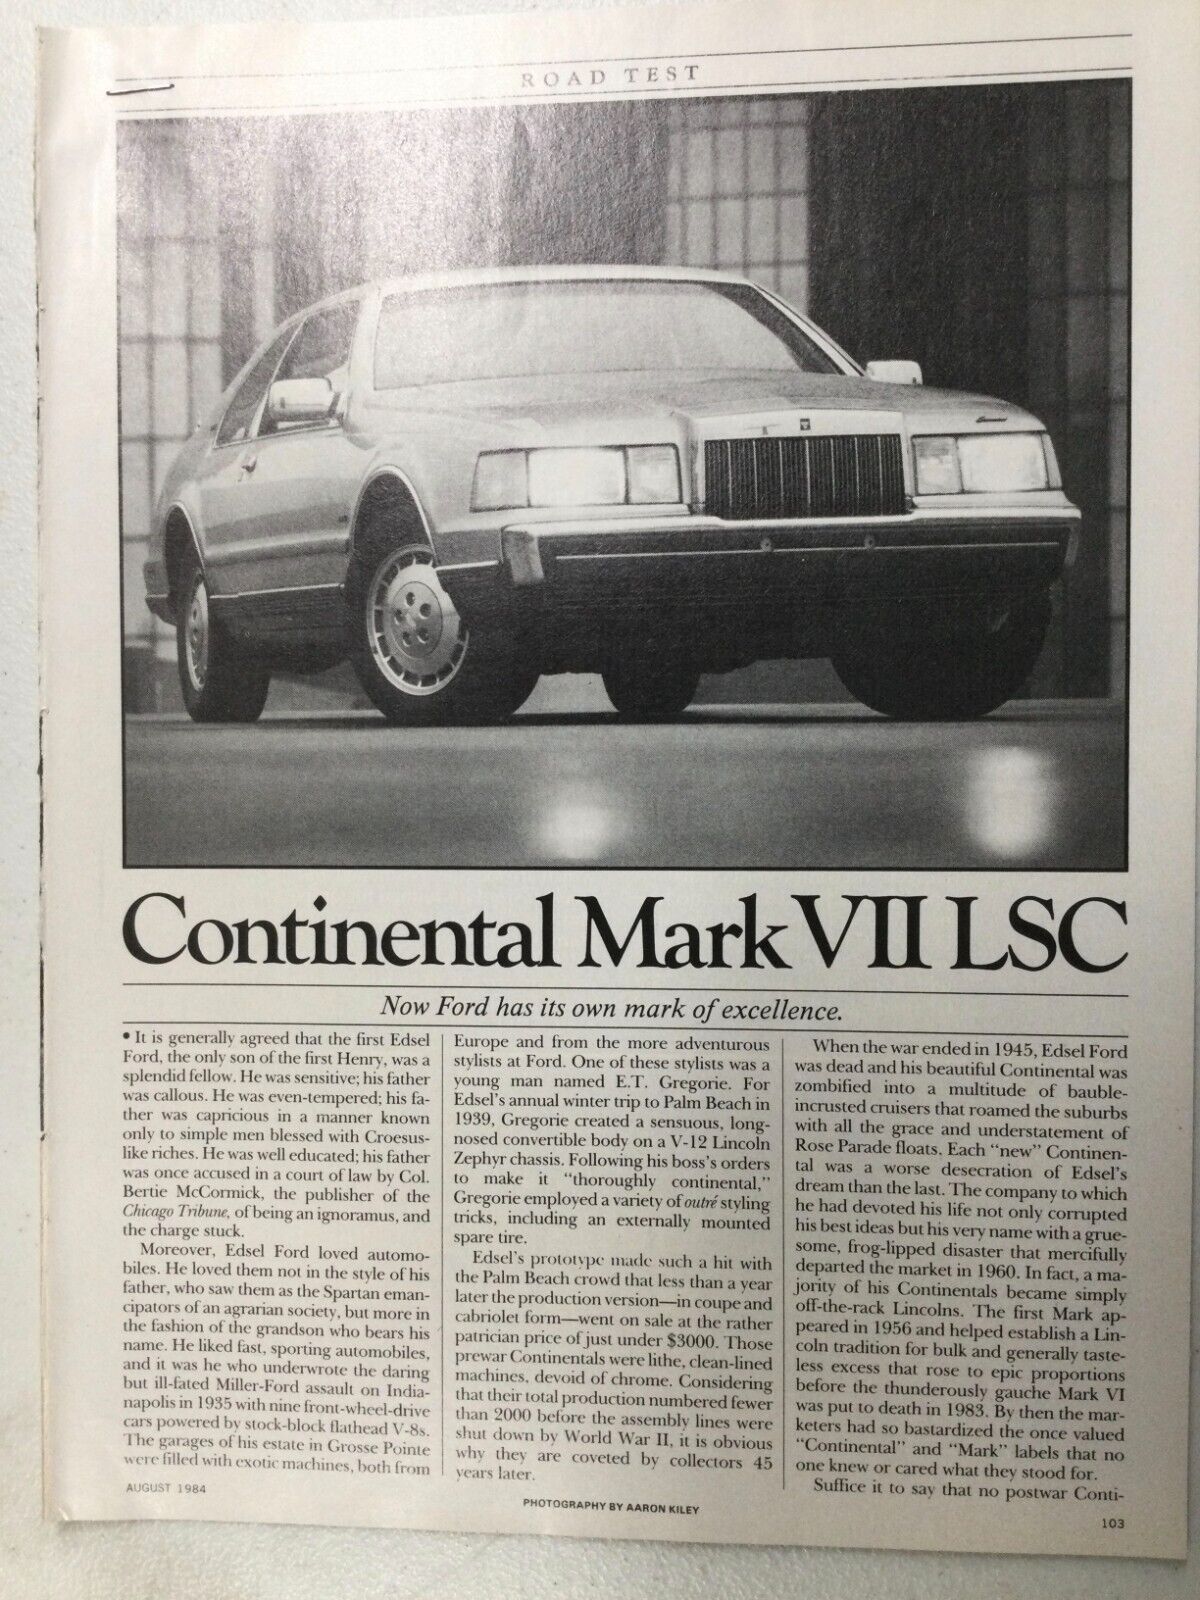 LincolnArt95 Article Road Test 1985 Continental Mark VII LSC Aug 1984 6 page